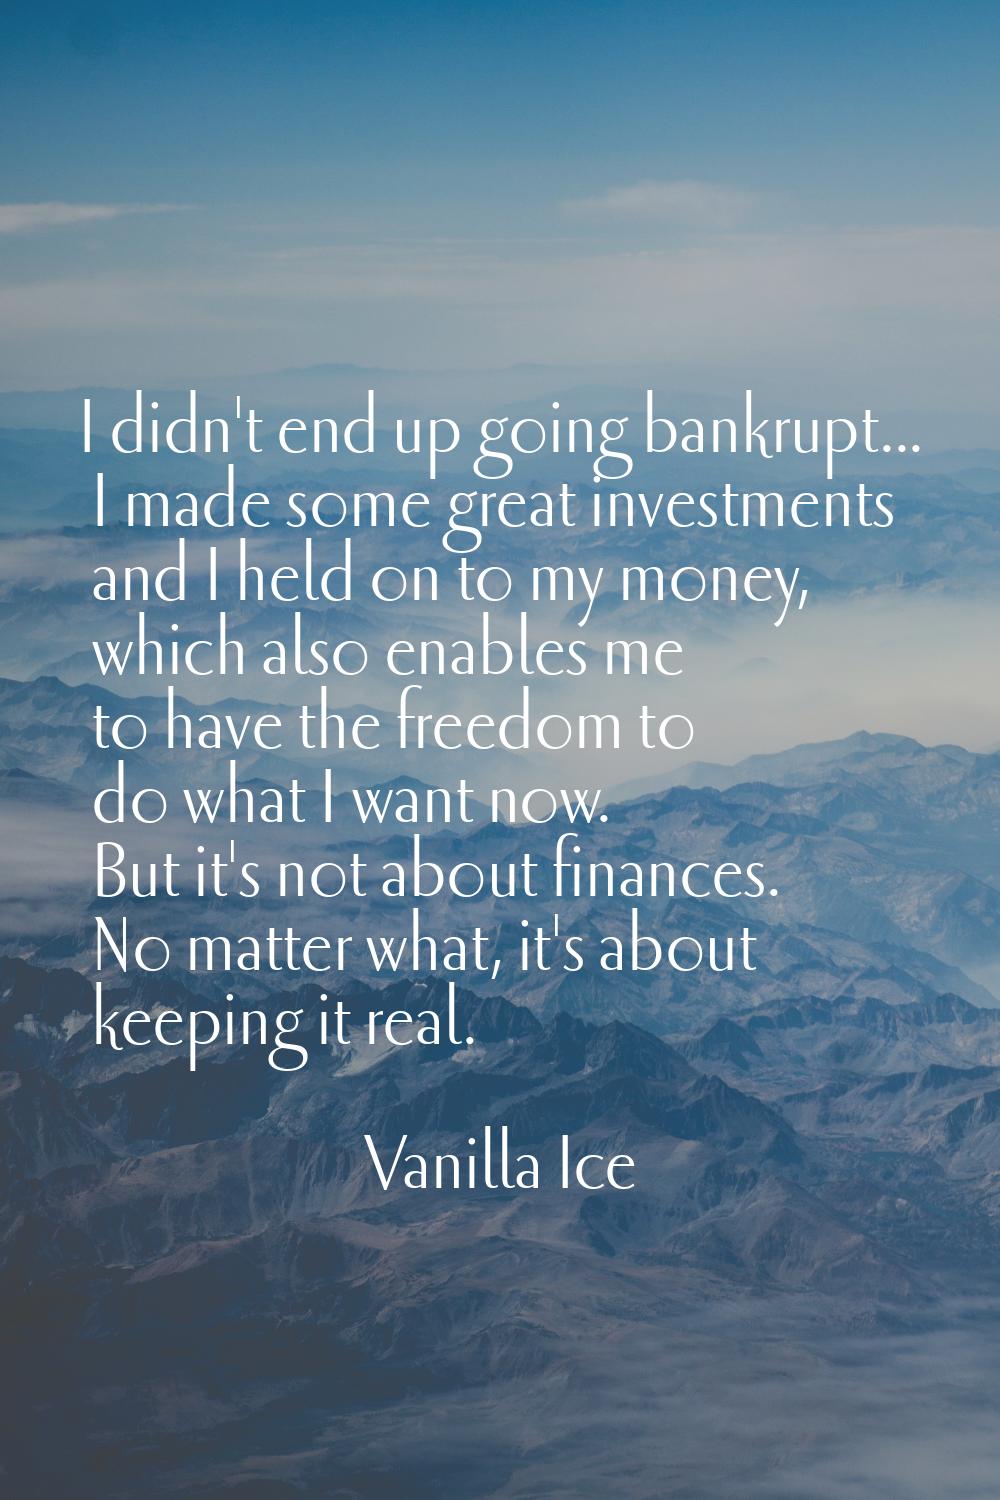 I didn't end up going bankrupt... I made some great investments and I held on to my money, which al